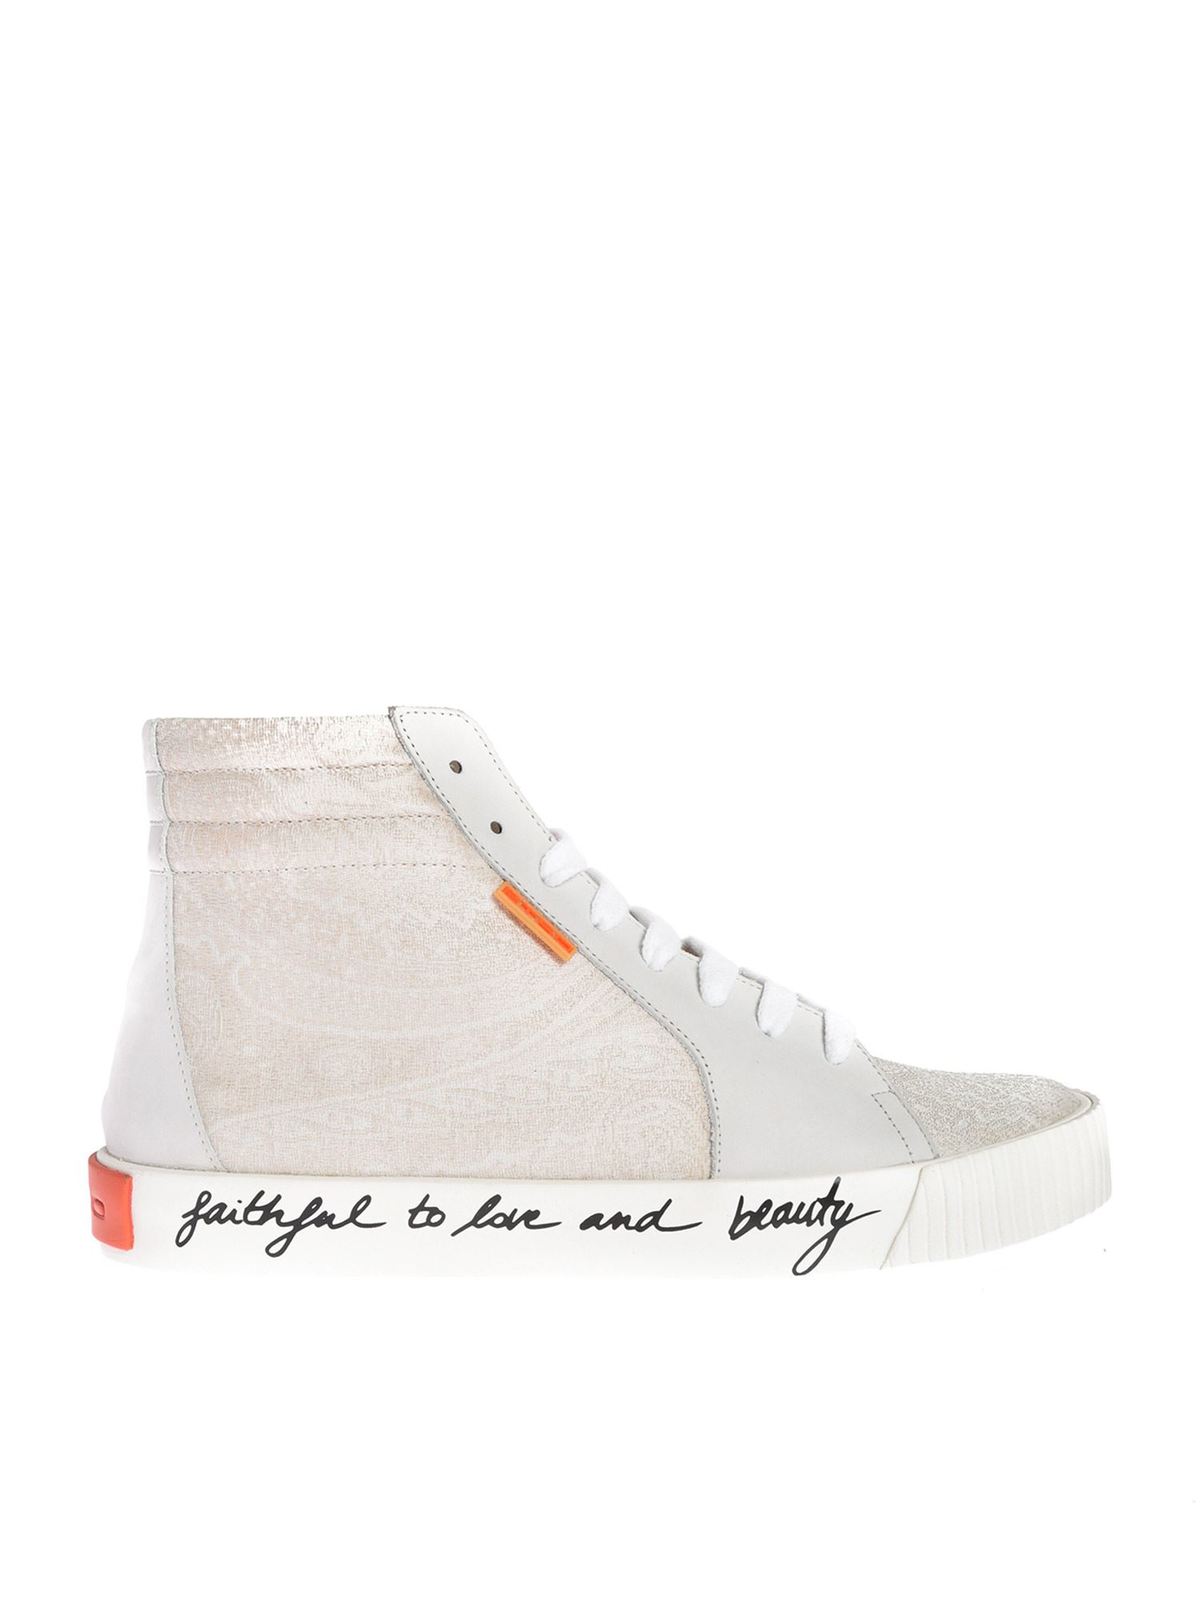 ETRO PAISLEY HIGH-TOP SNEAKERS IN CREAM COLOR